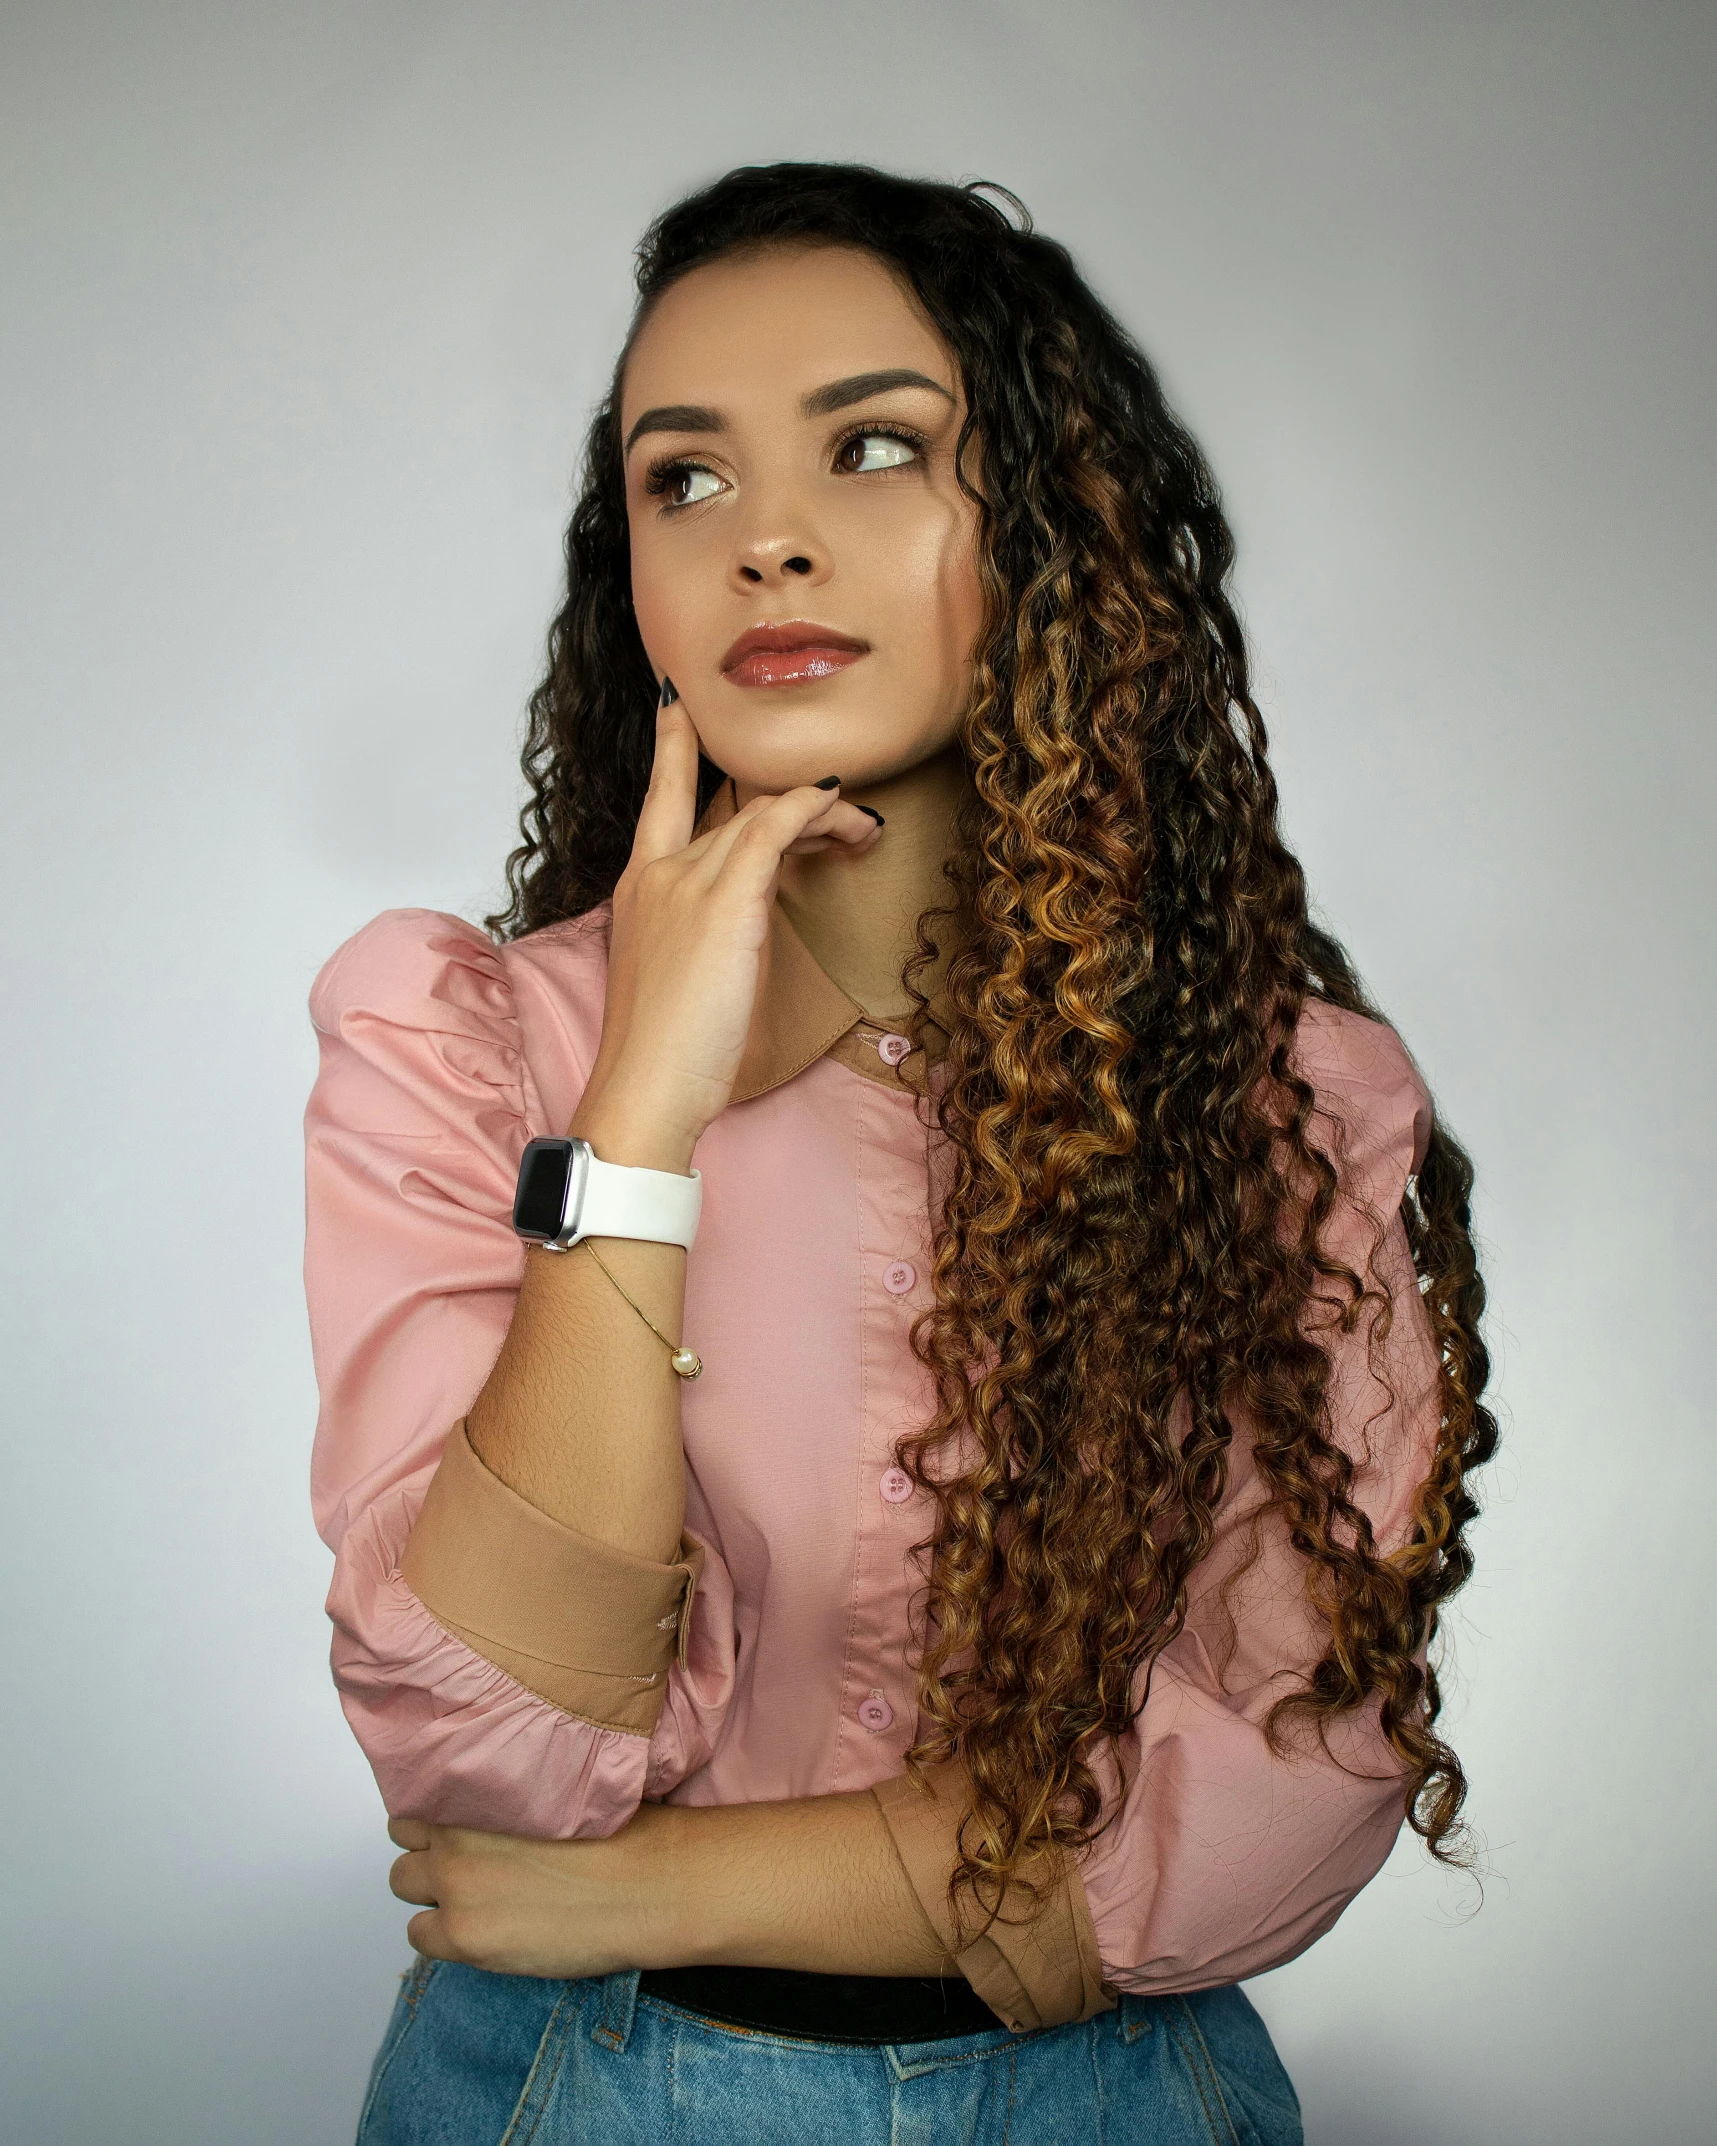 a young woman with brown curly hair in a pink shirt poses for the camera